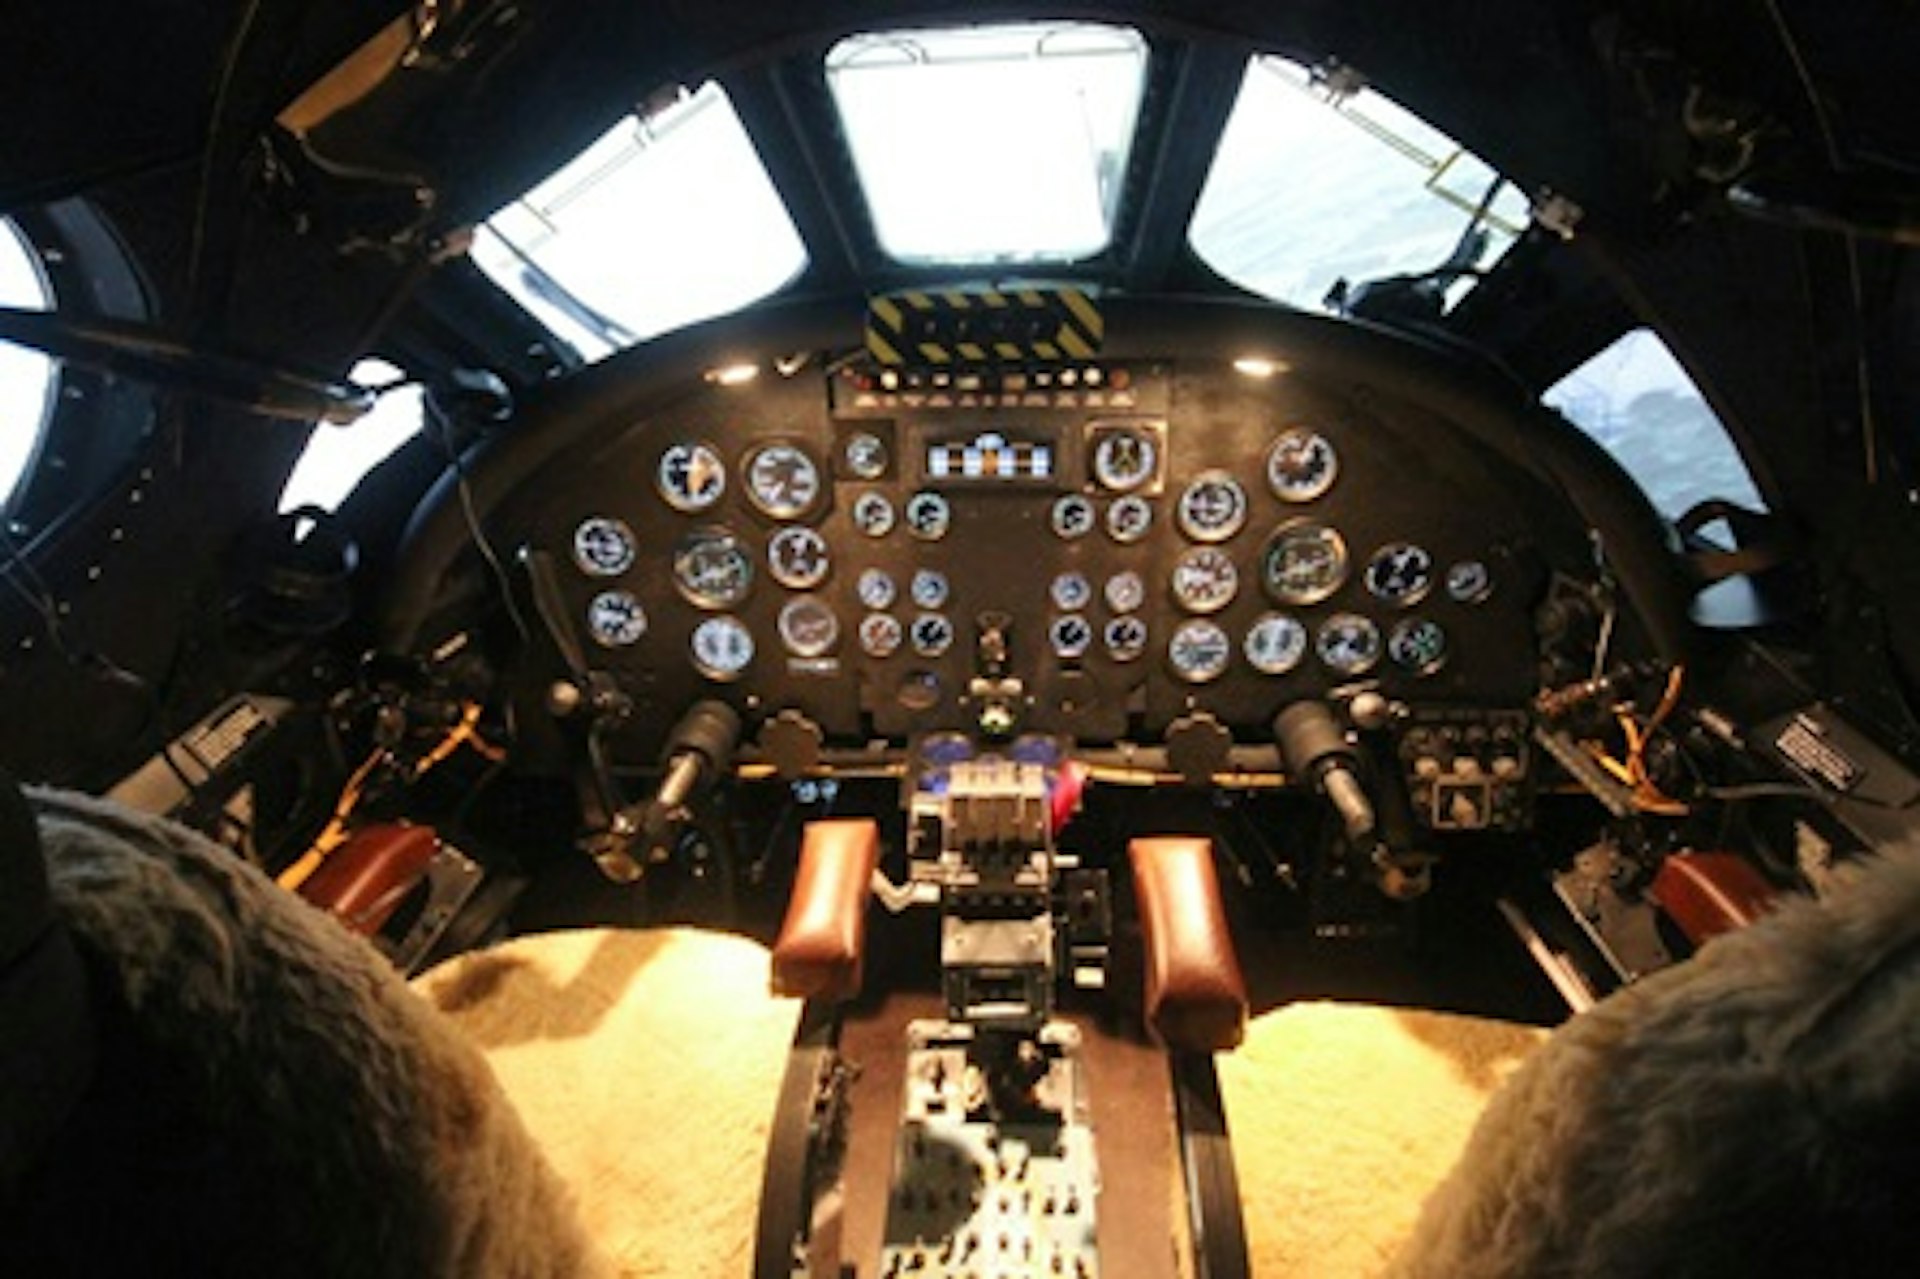 Fly the World's Only Vulcan Bomber Flight Simulator - 60 minutes 1